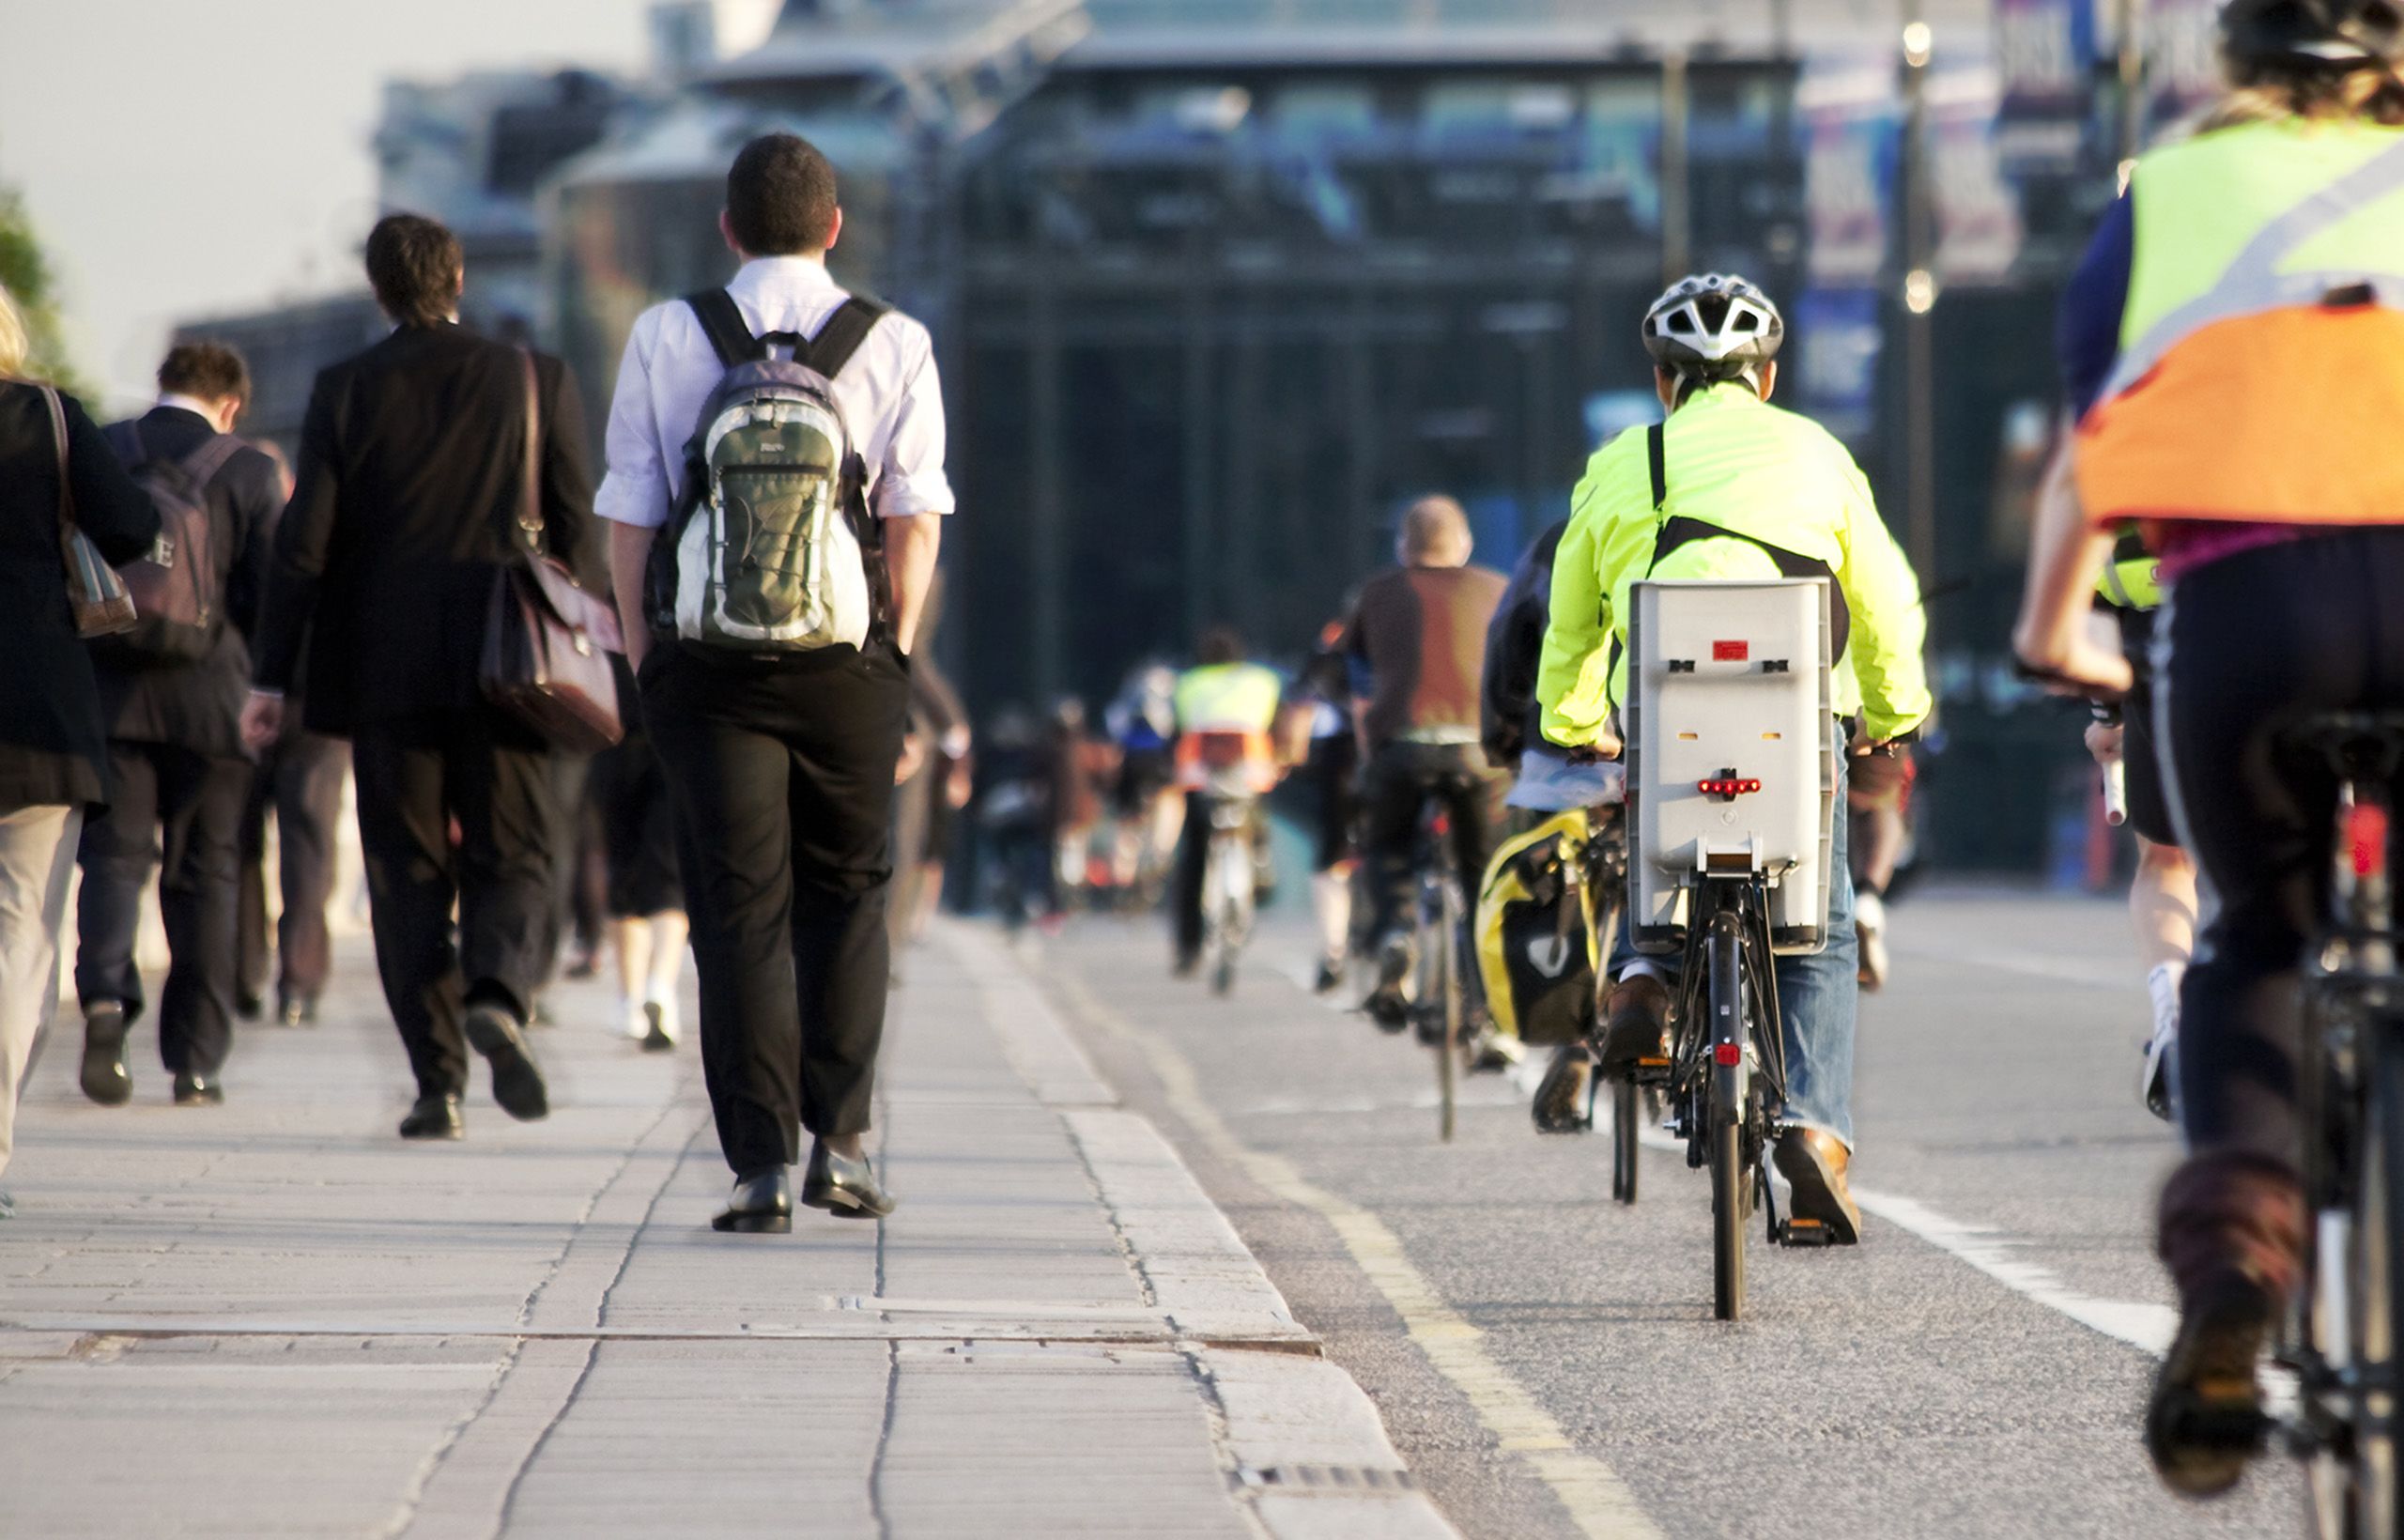 Commuters on foot and cycling. Credit: DesignSensation/ Getty